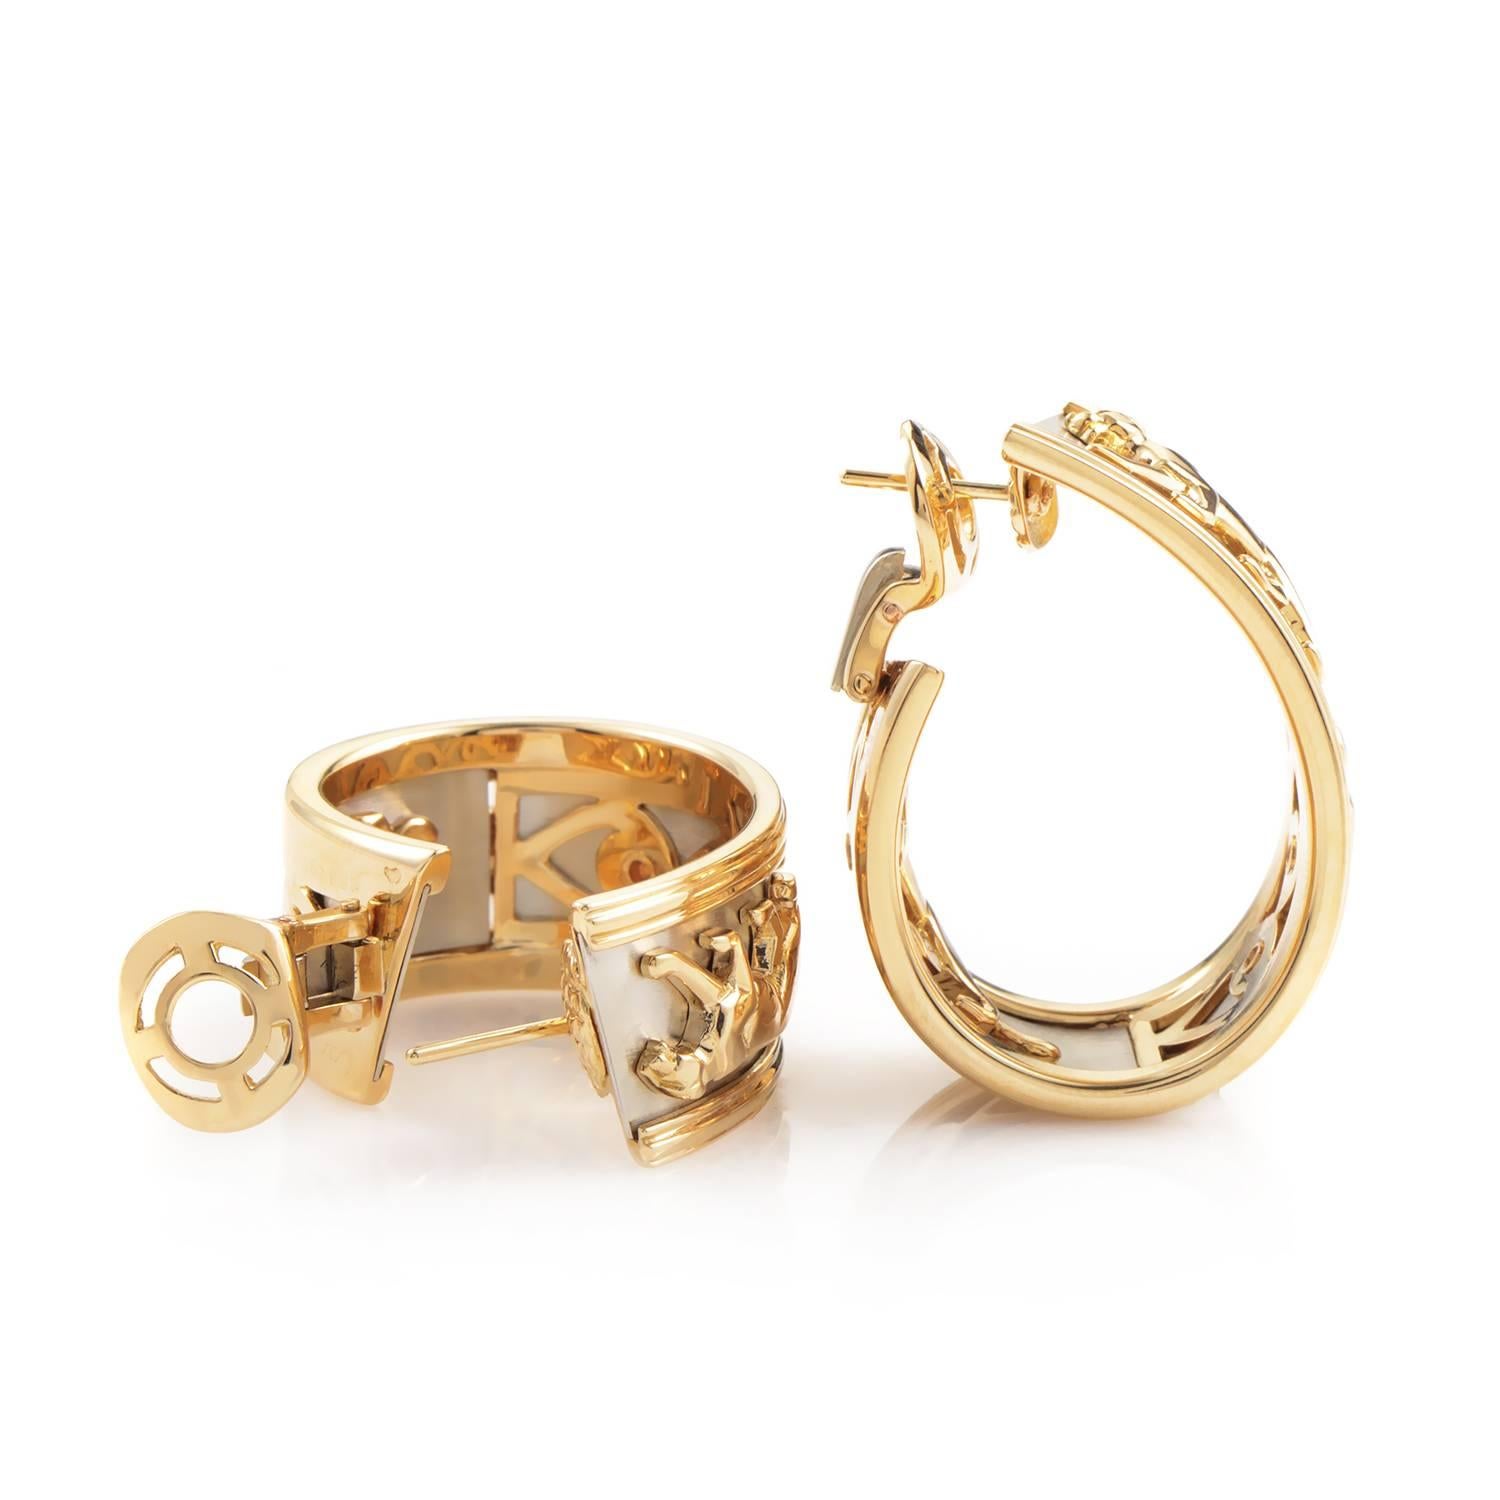 Cartier's Panthere collection is renowned for its fierce and sassy designs that bring out the wearer's wild side. This pair of earrings from the collection boast a design made of 18K white and yellow gold featuring panthers on the prowl all over